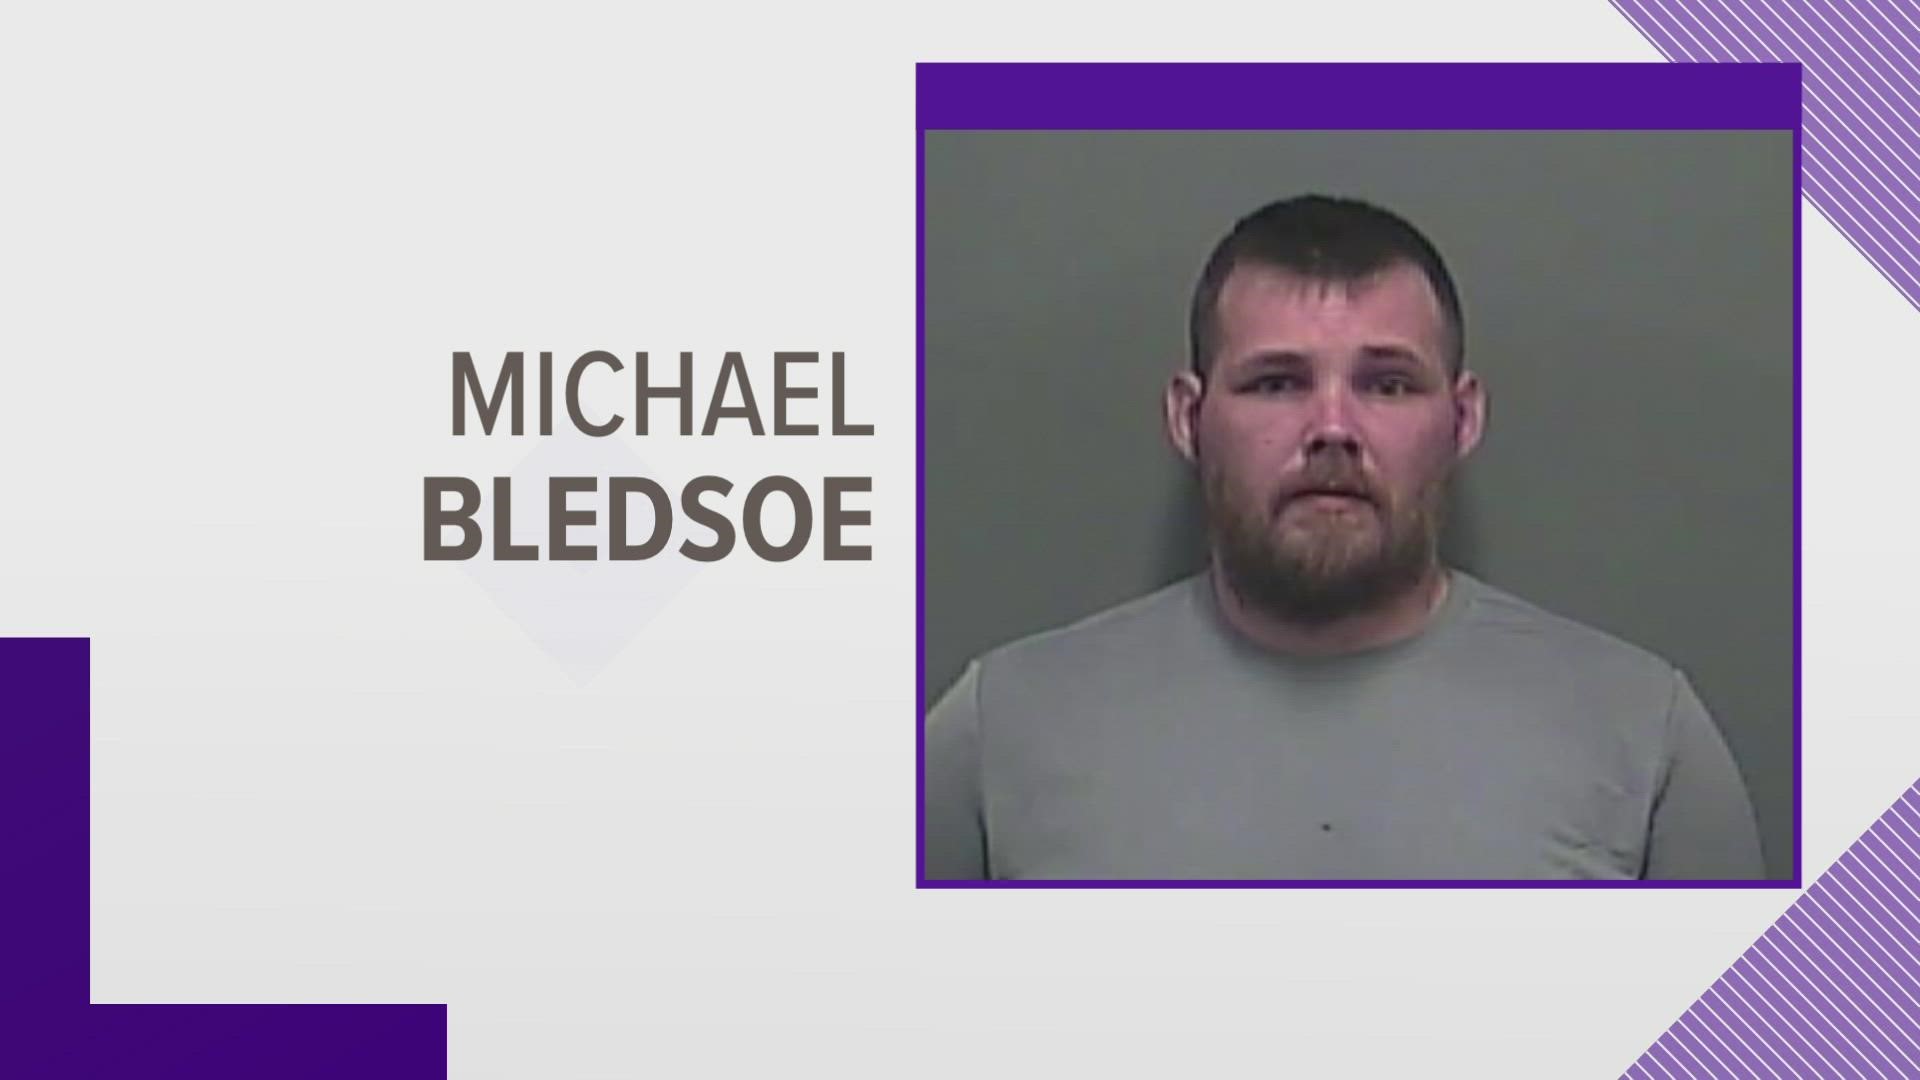 KPD said it has warrants out for Michael Bledsoe's arrest, saying he snatched the woman's purse outside her home.